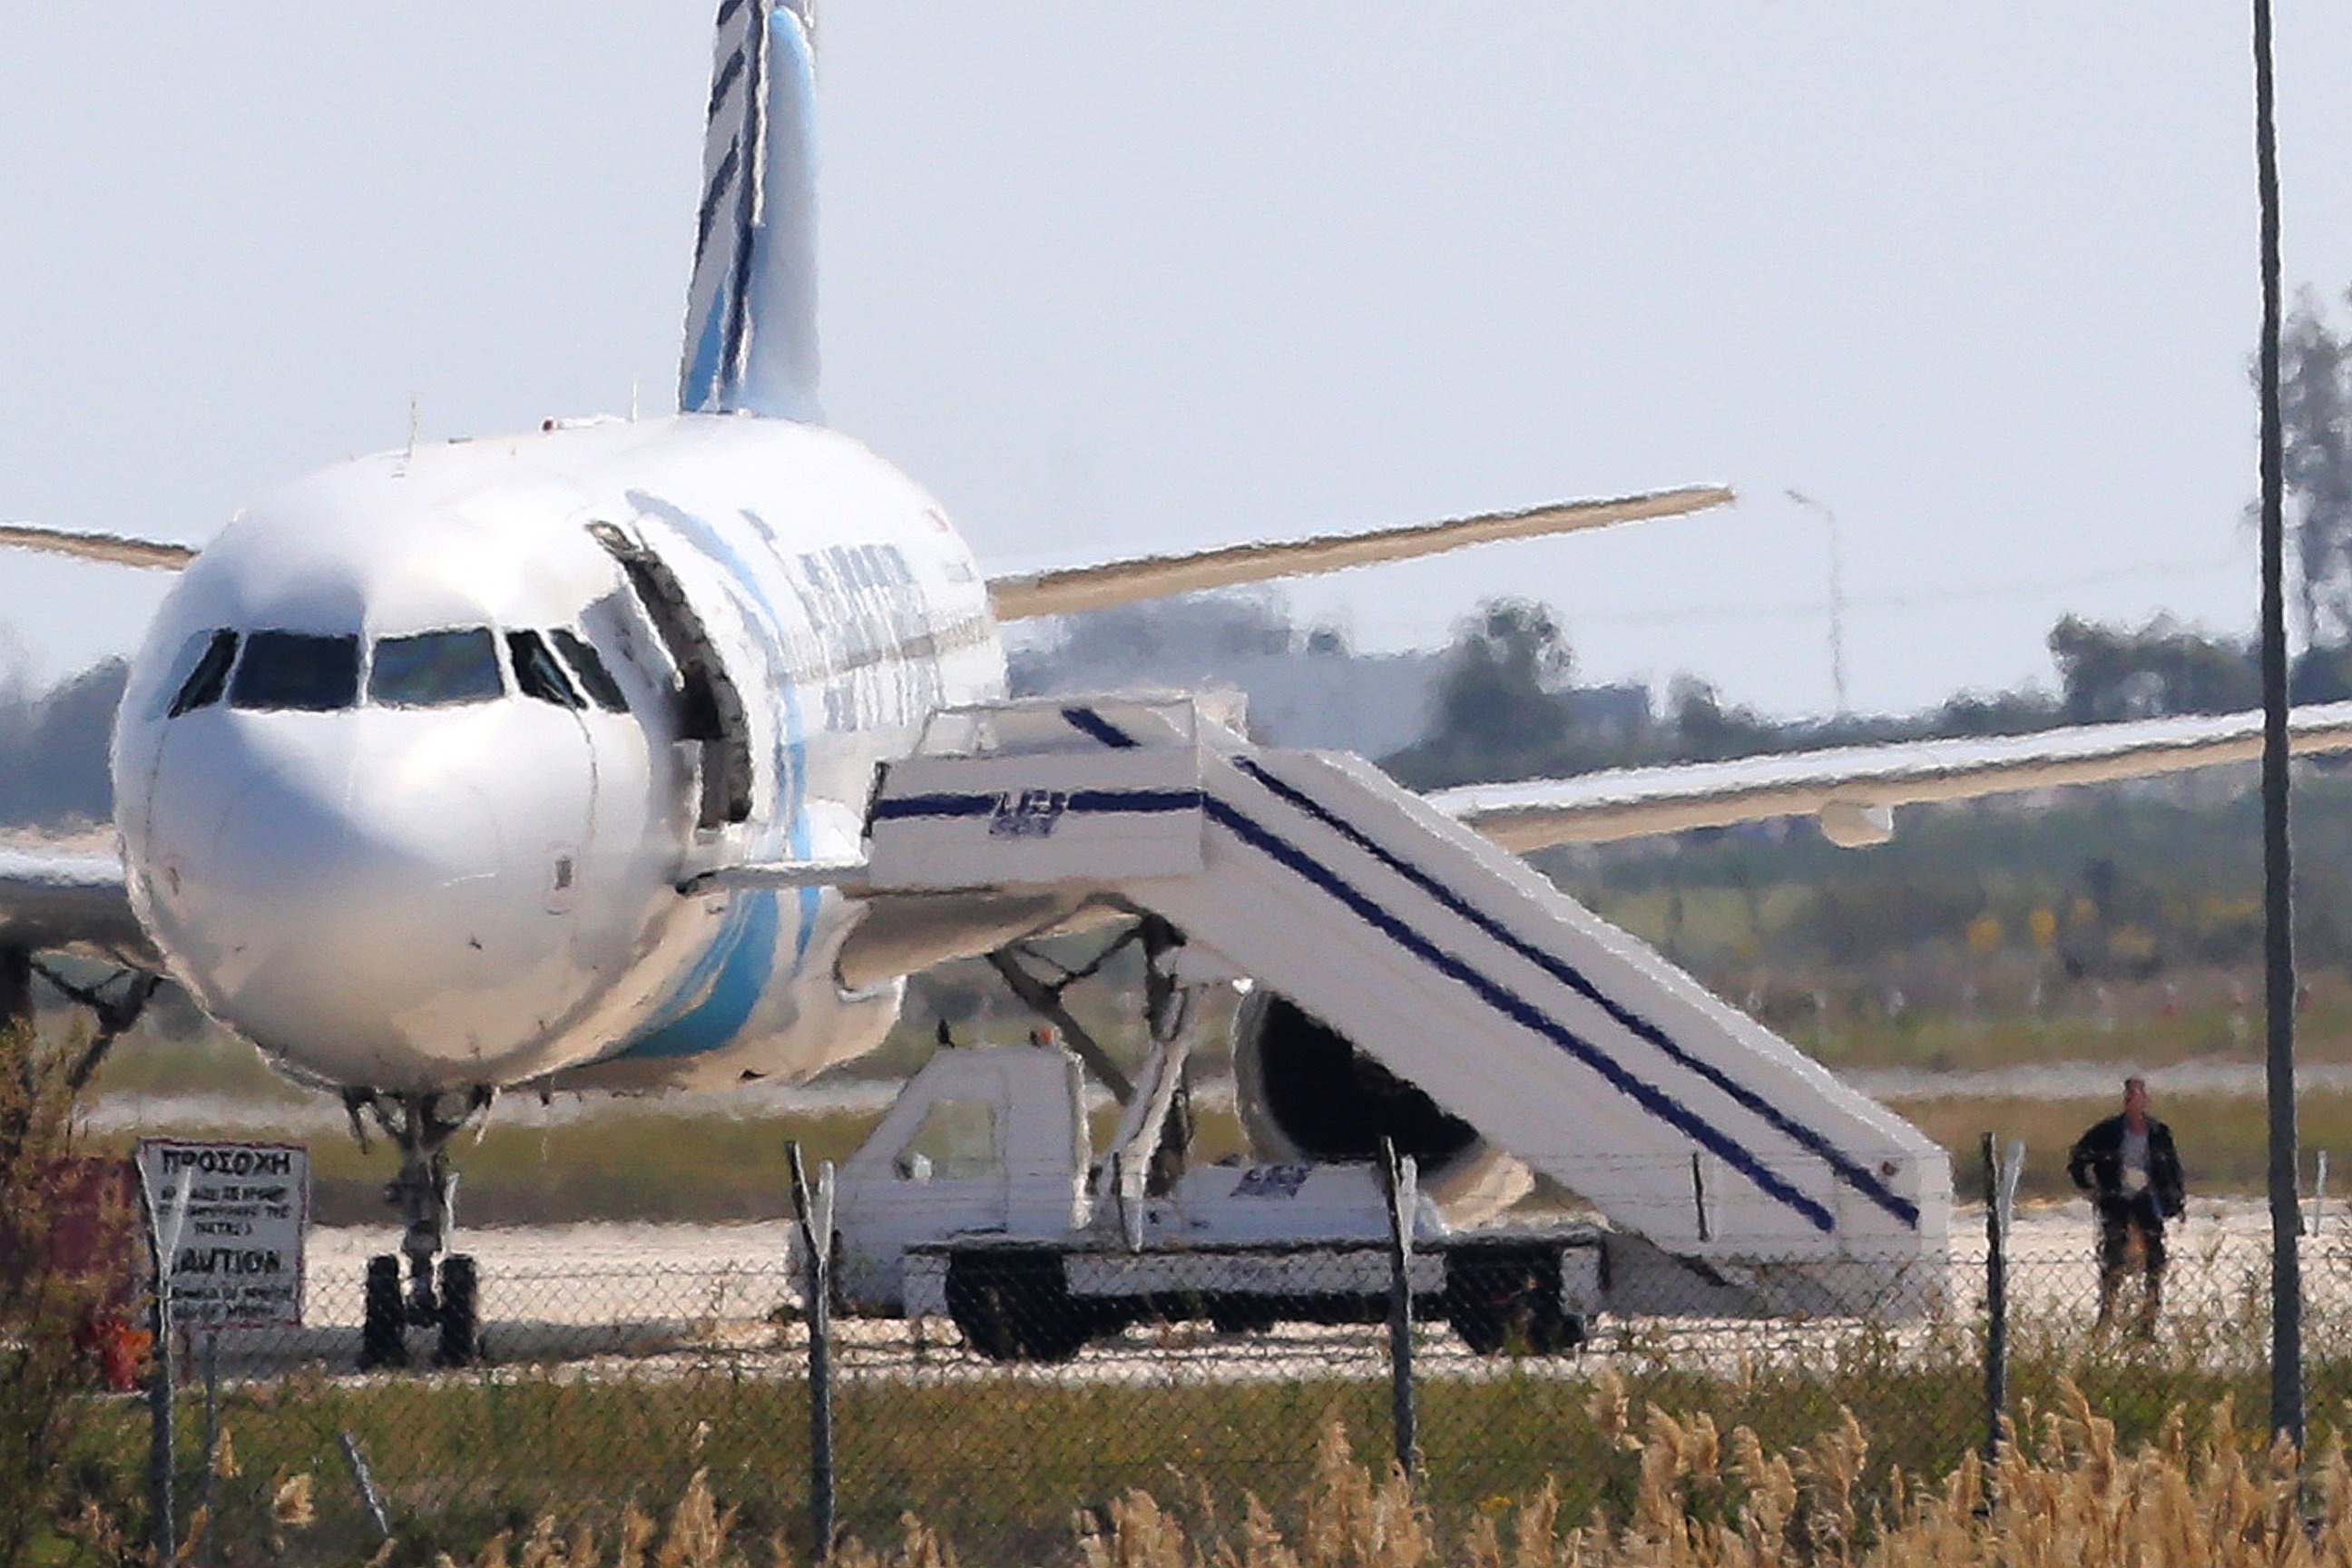 PHOTO: A man leaves the hijacked Egyptair plane at Larnaca airport on the island of Cyprus, March 29, 2016.